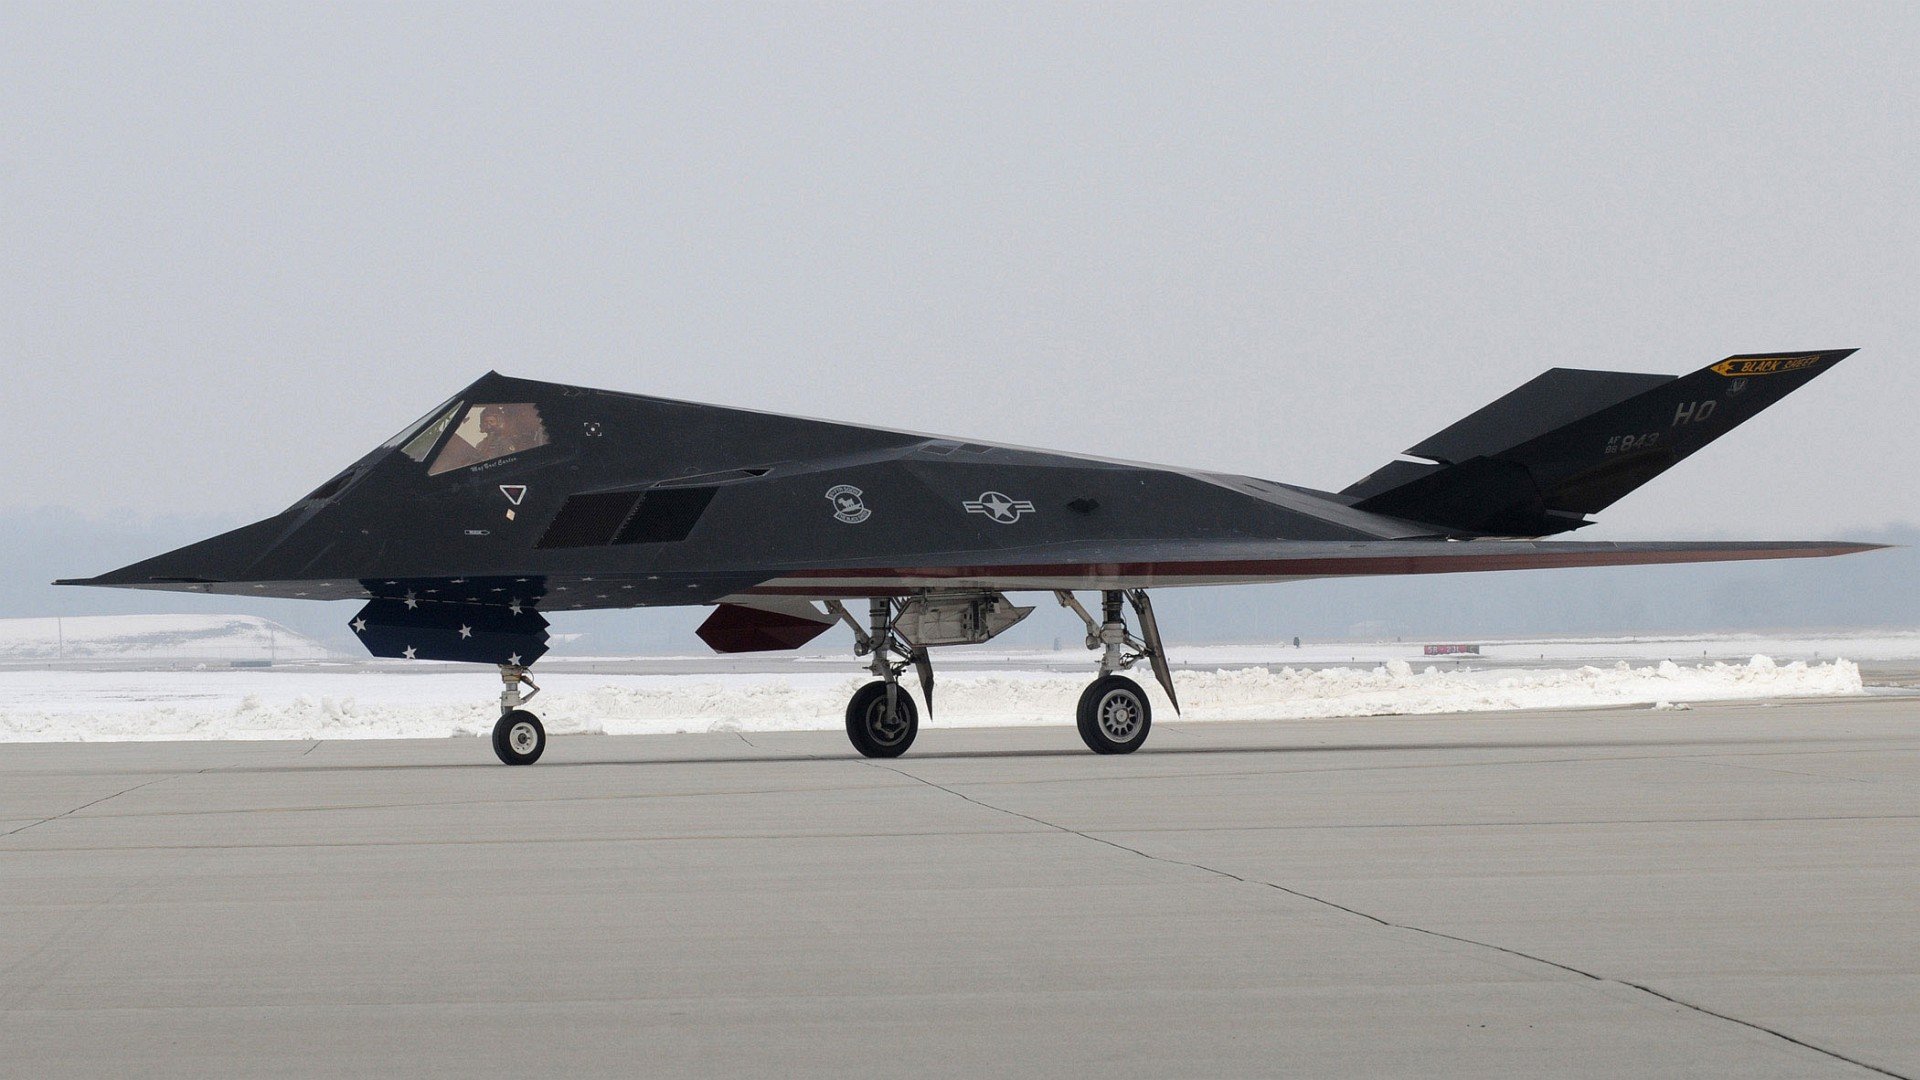 Free Stealth Aircraft high quality wallpaper ID:495593 for hd 1920x1080 desktop